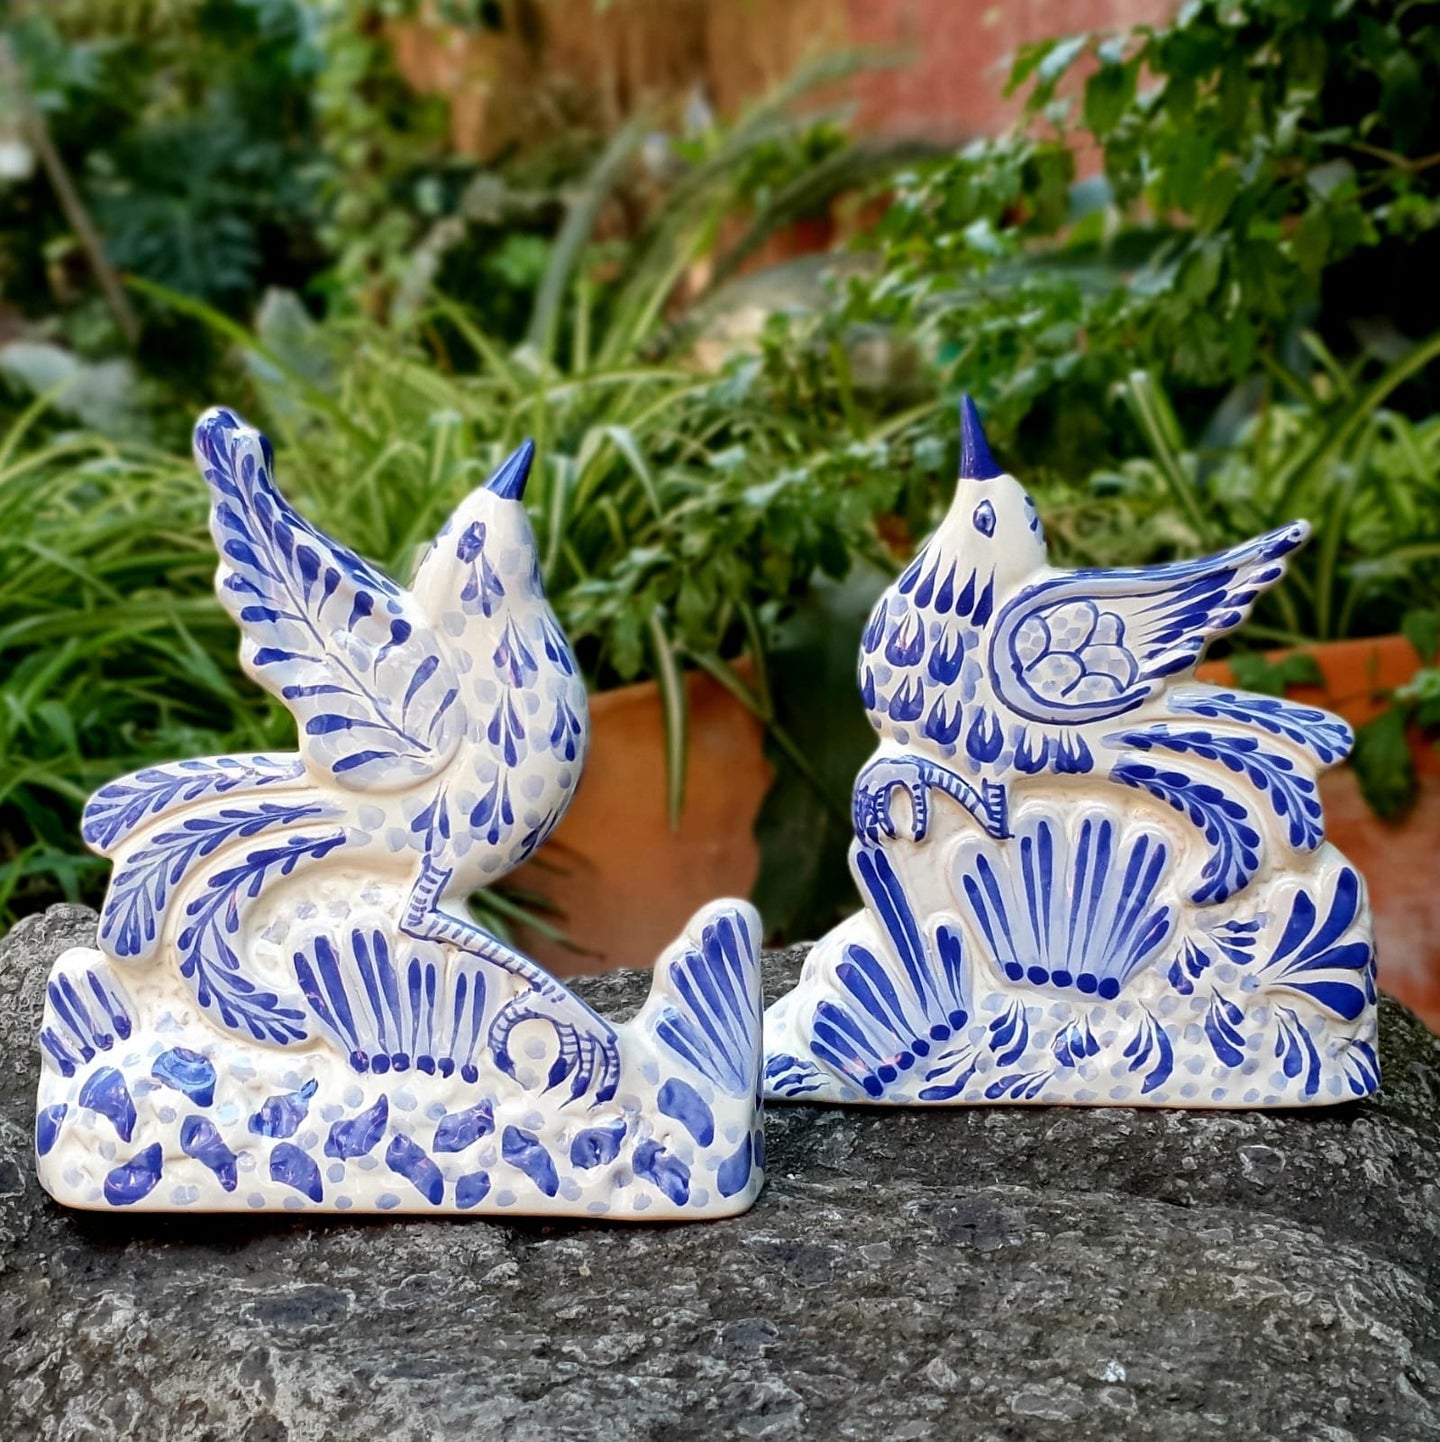 Dancing Birds Table Figure Blue and White